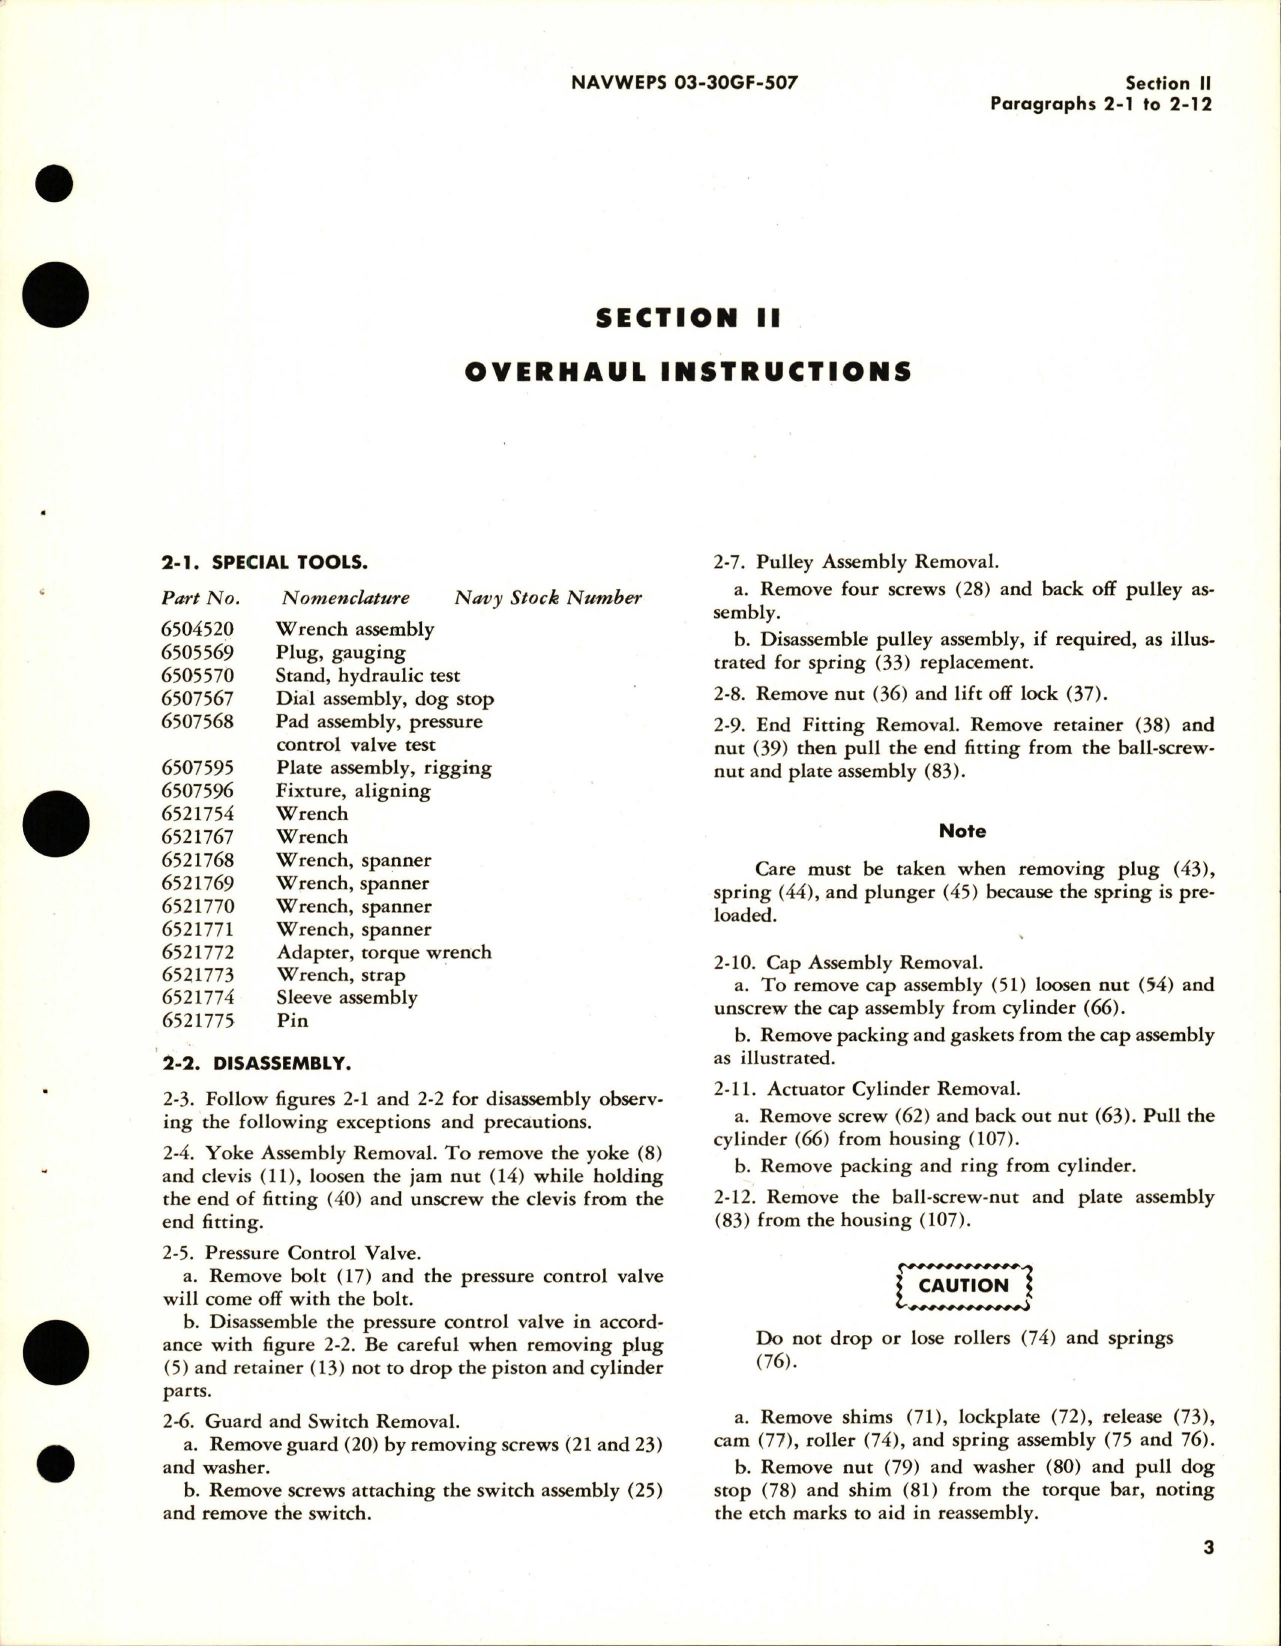 Sample page 7 from AirCorps Library document: Overhaul Instructions for Actuators 